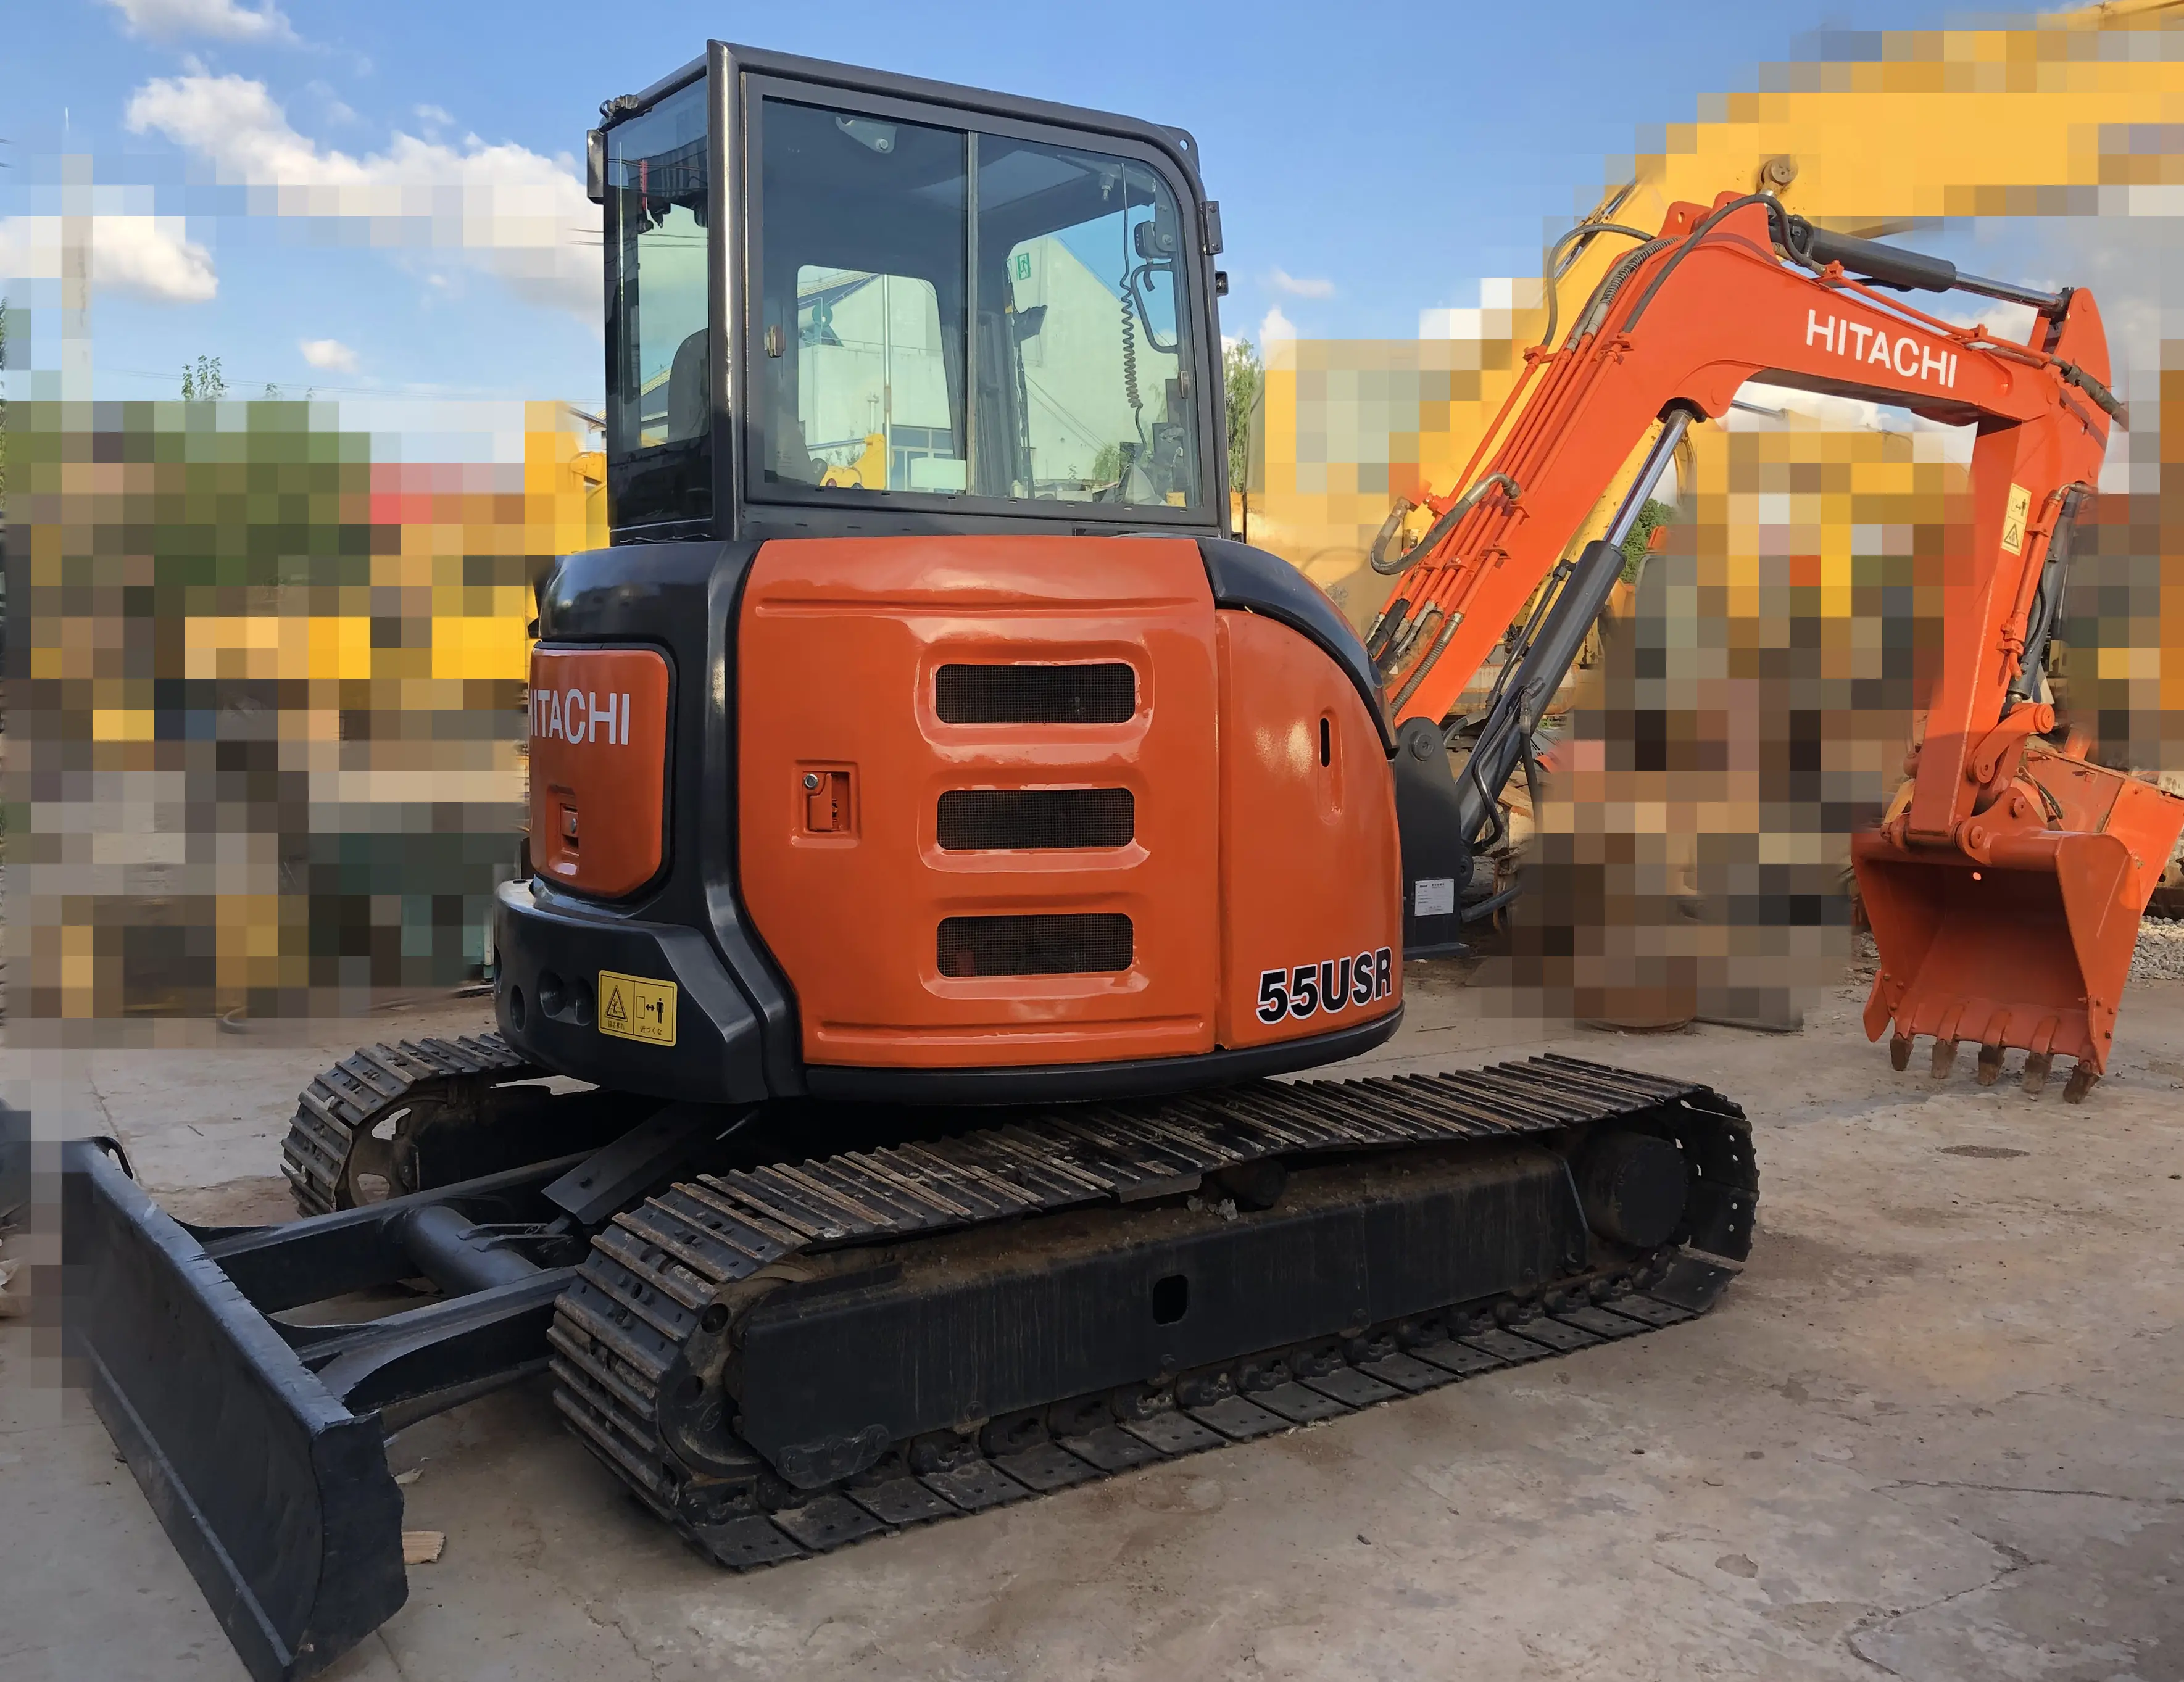 live good quality new arrival hitachi earth moving digger hitachi excavator zx30 zx50 zx55 zx60 zx70 zx120 zx200 zx210 zx240